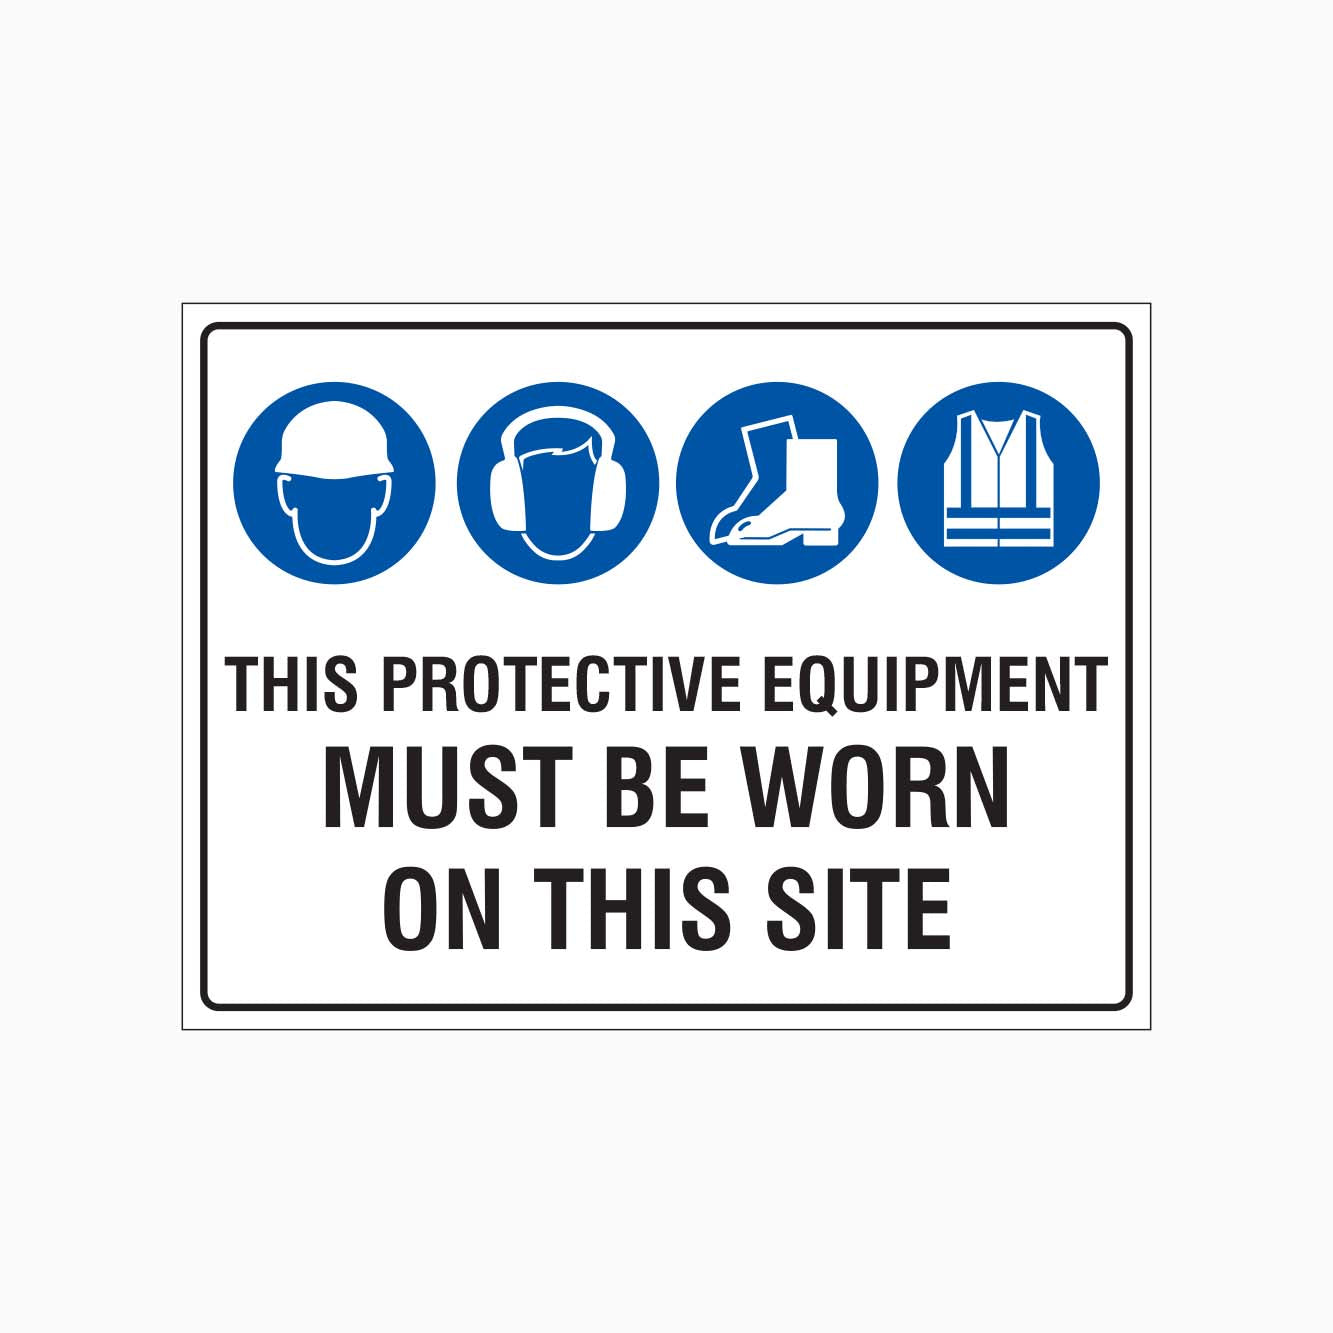 HARD HAT, HEARING PROTECTION, SAFETY SHOES AND VEST MUST BE WORN ON THIS SITE SIGN - GET SIGNS